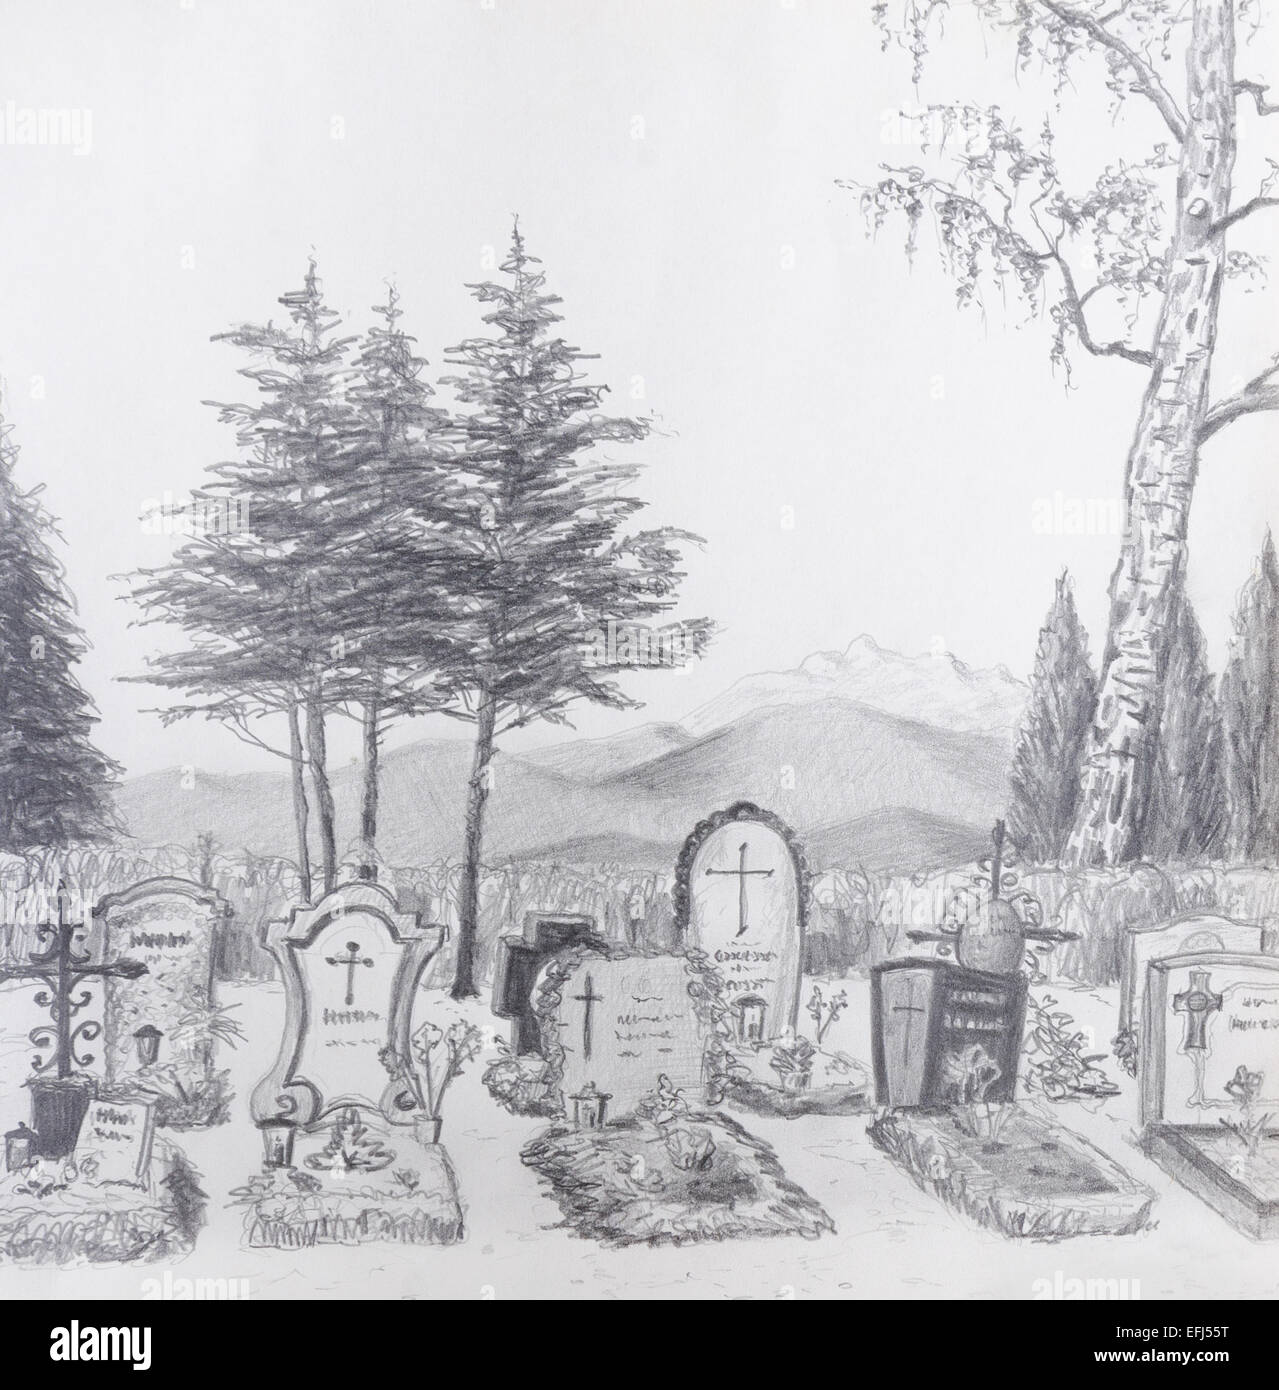 How to Draw a Gothic Graveyard - YouTube